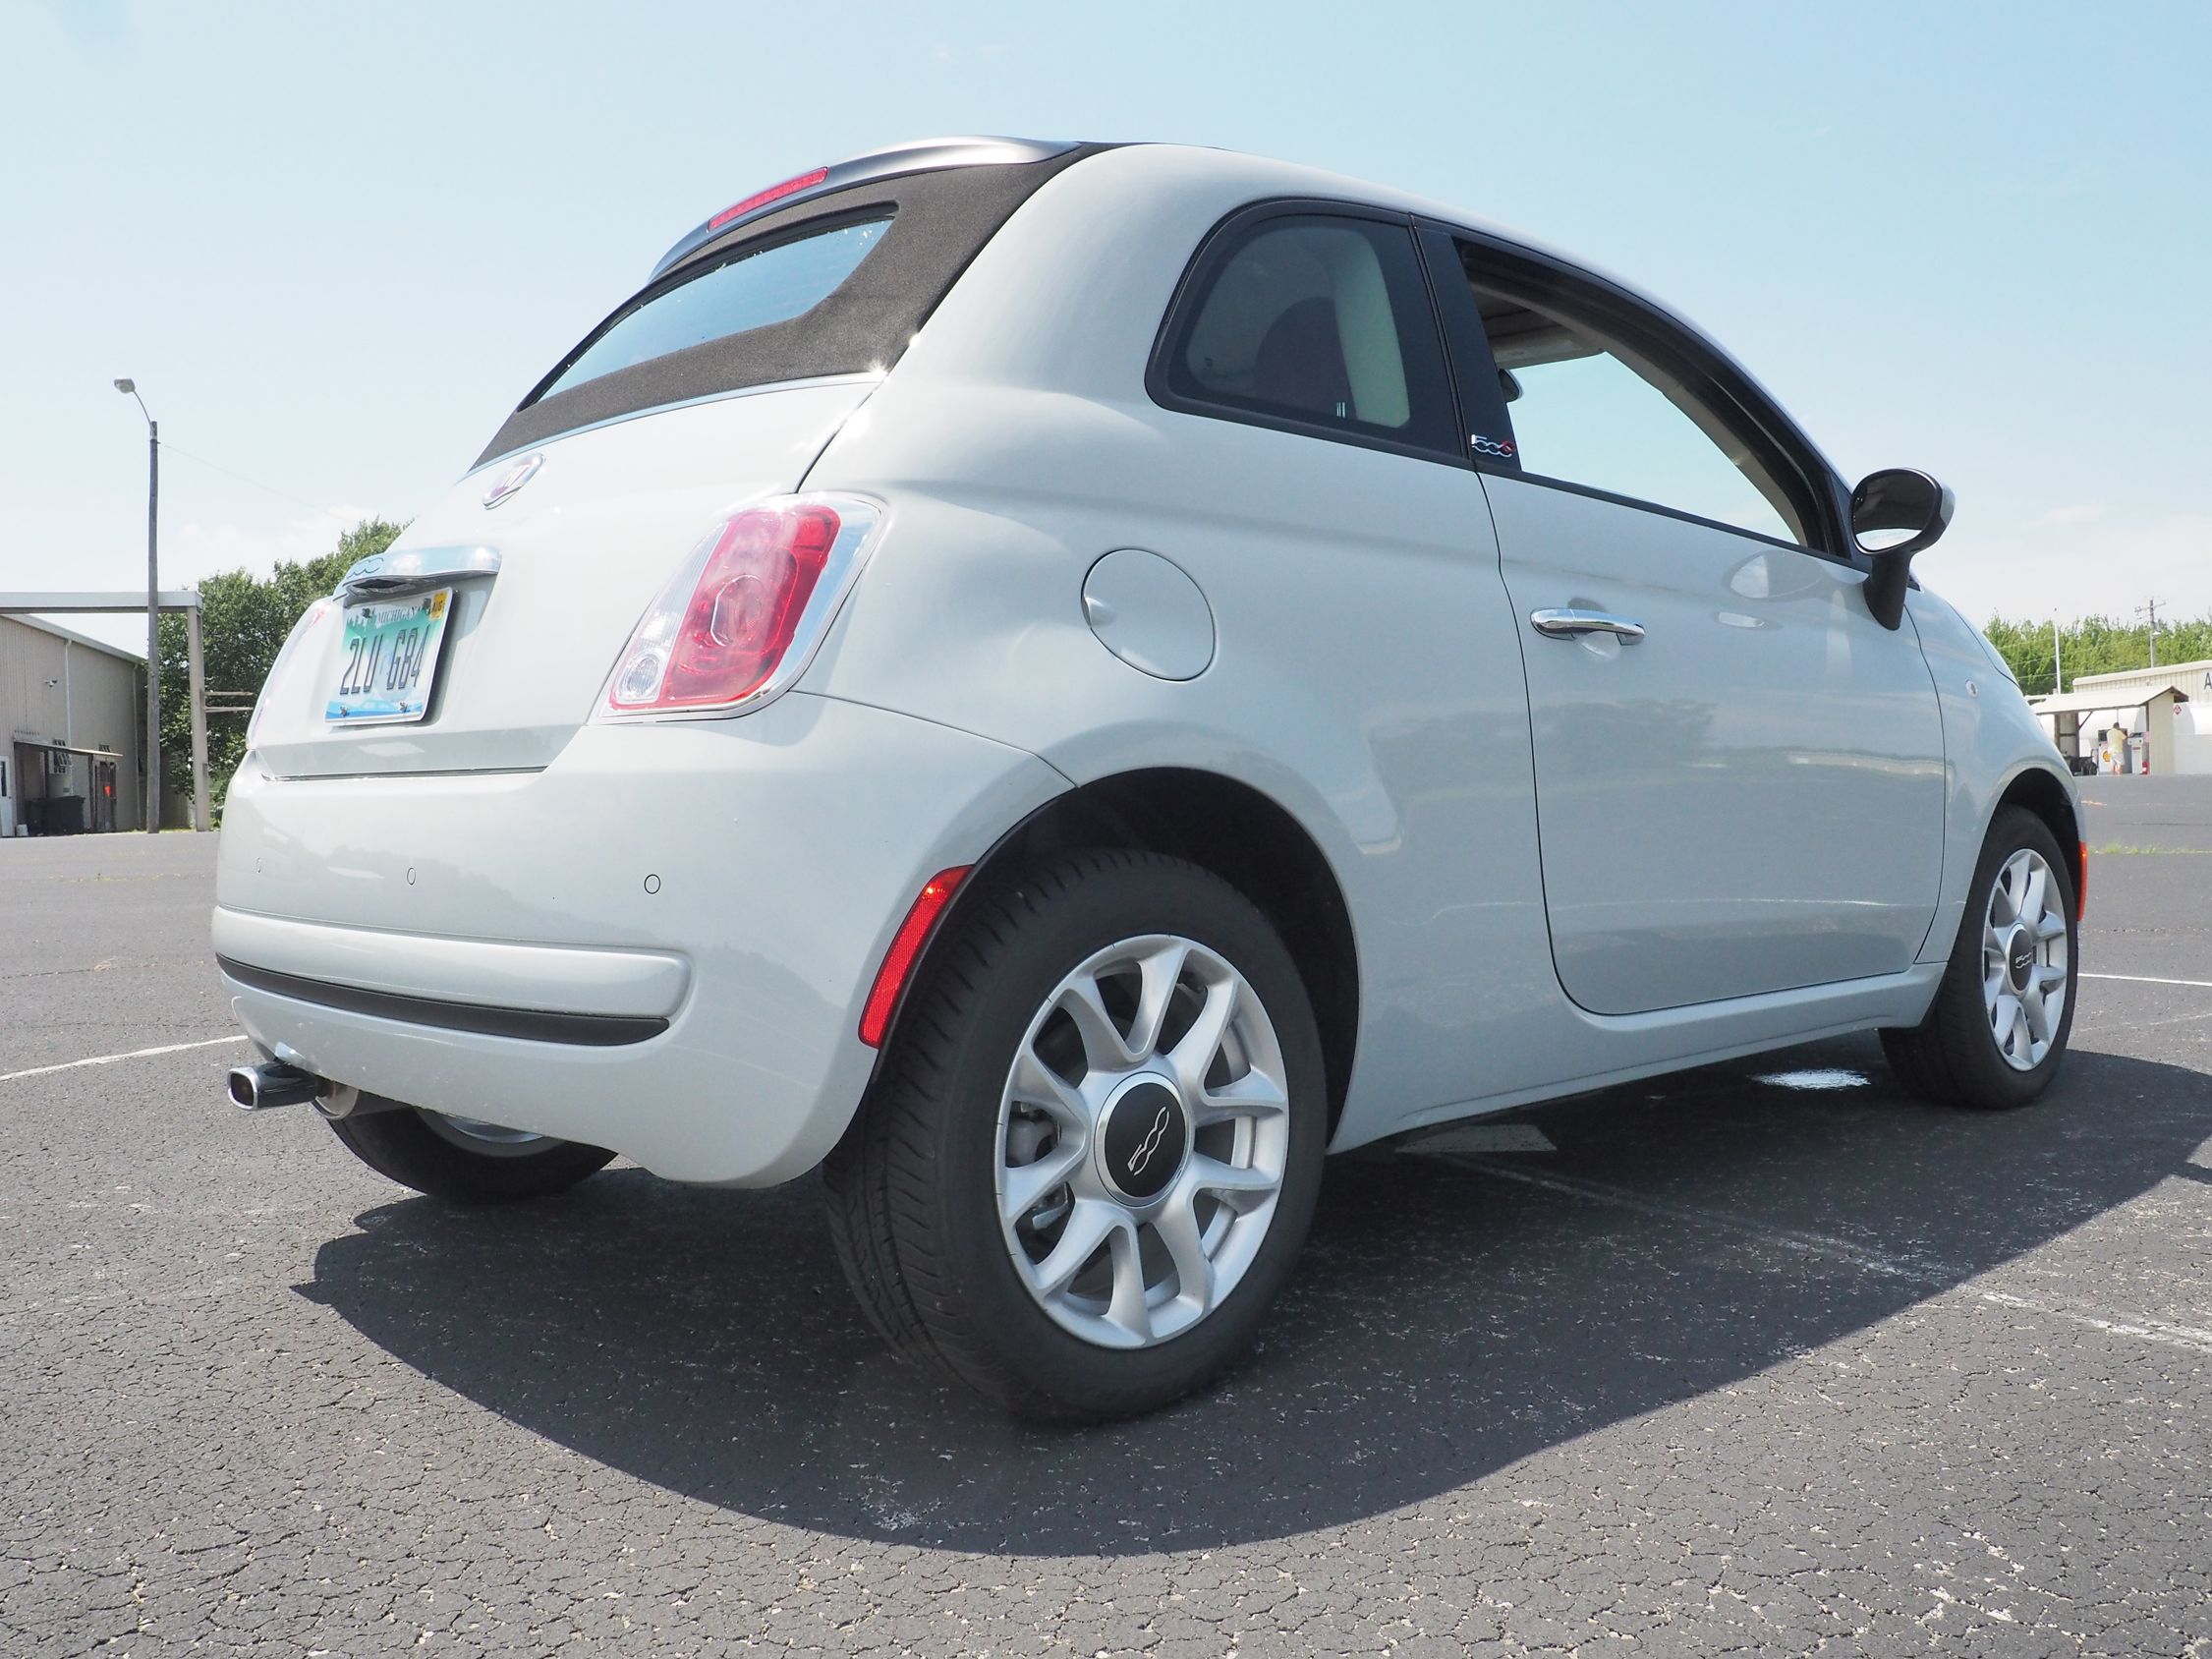 Fiat 500C offers an amazing open top driving experience